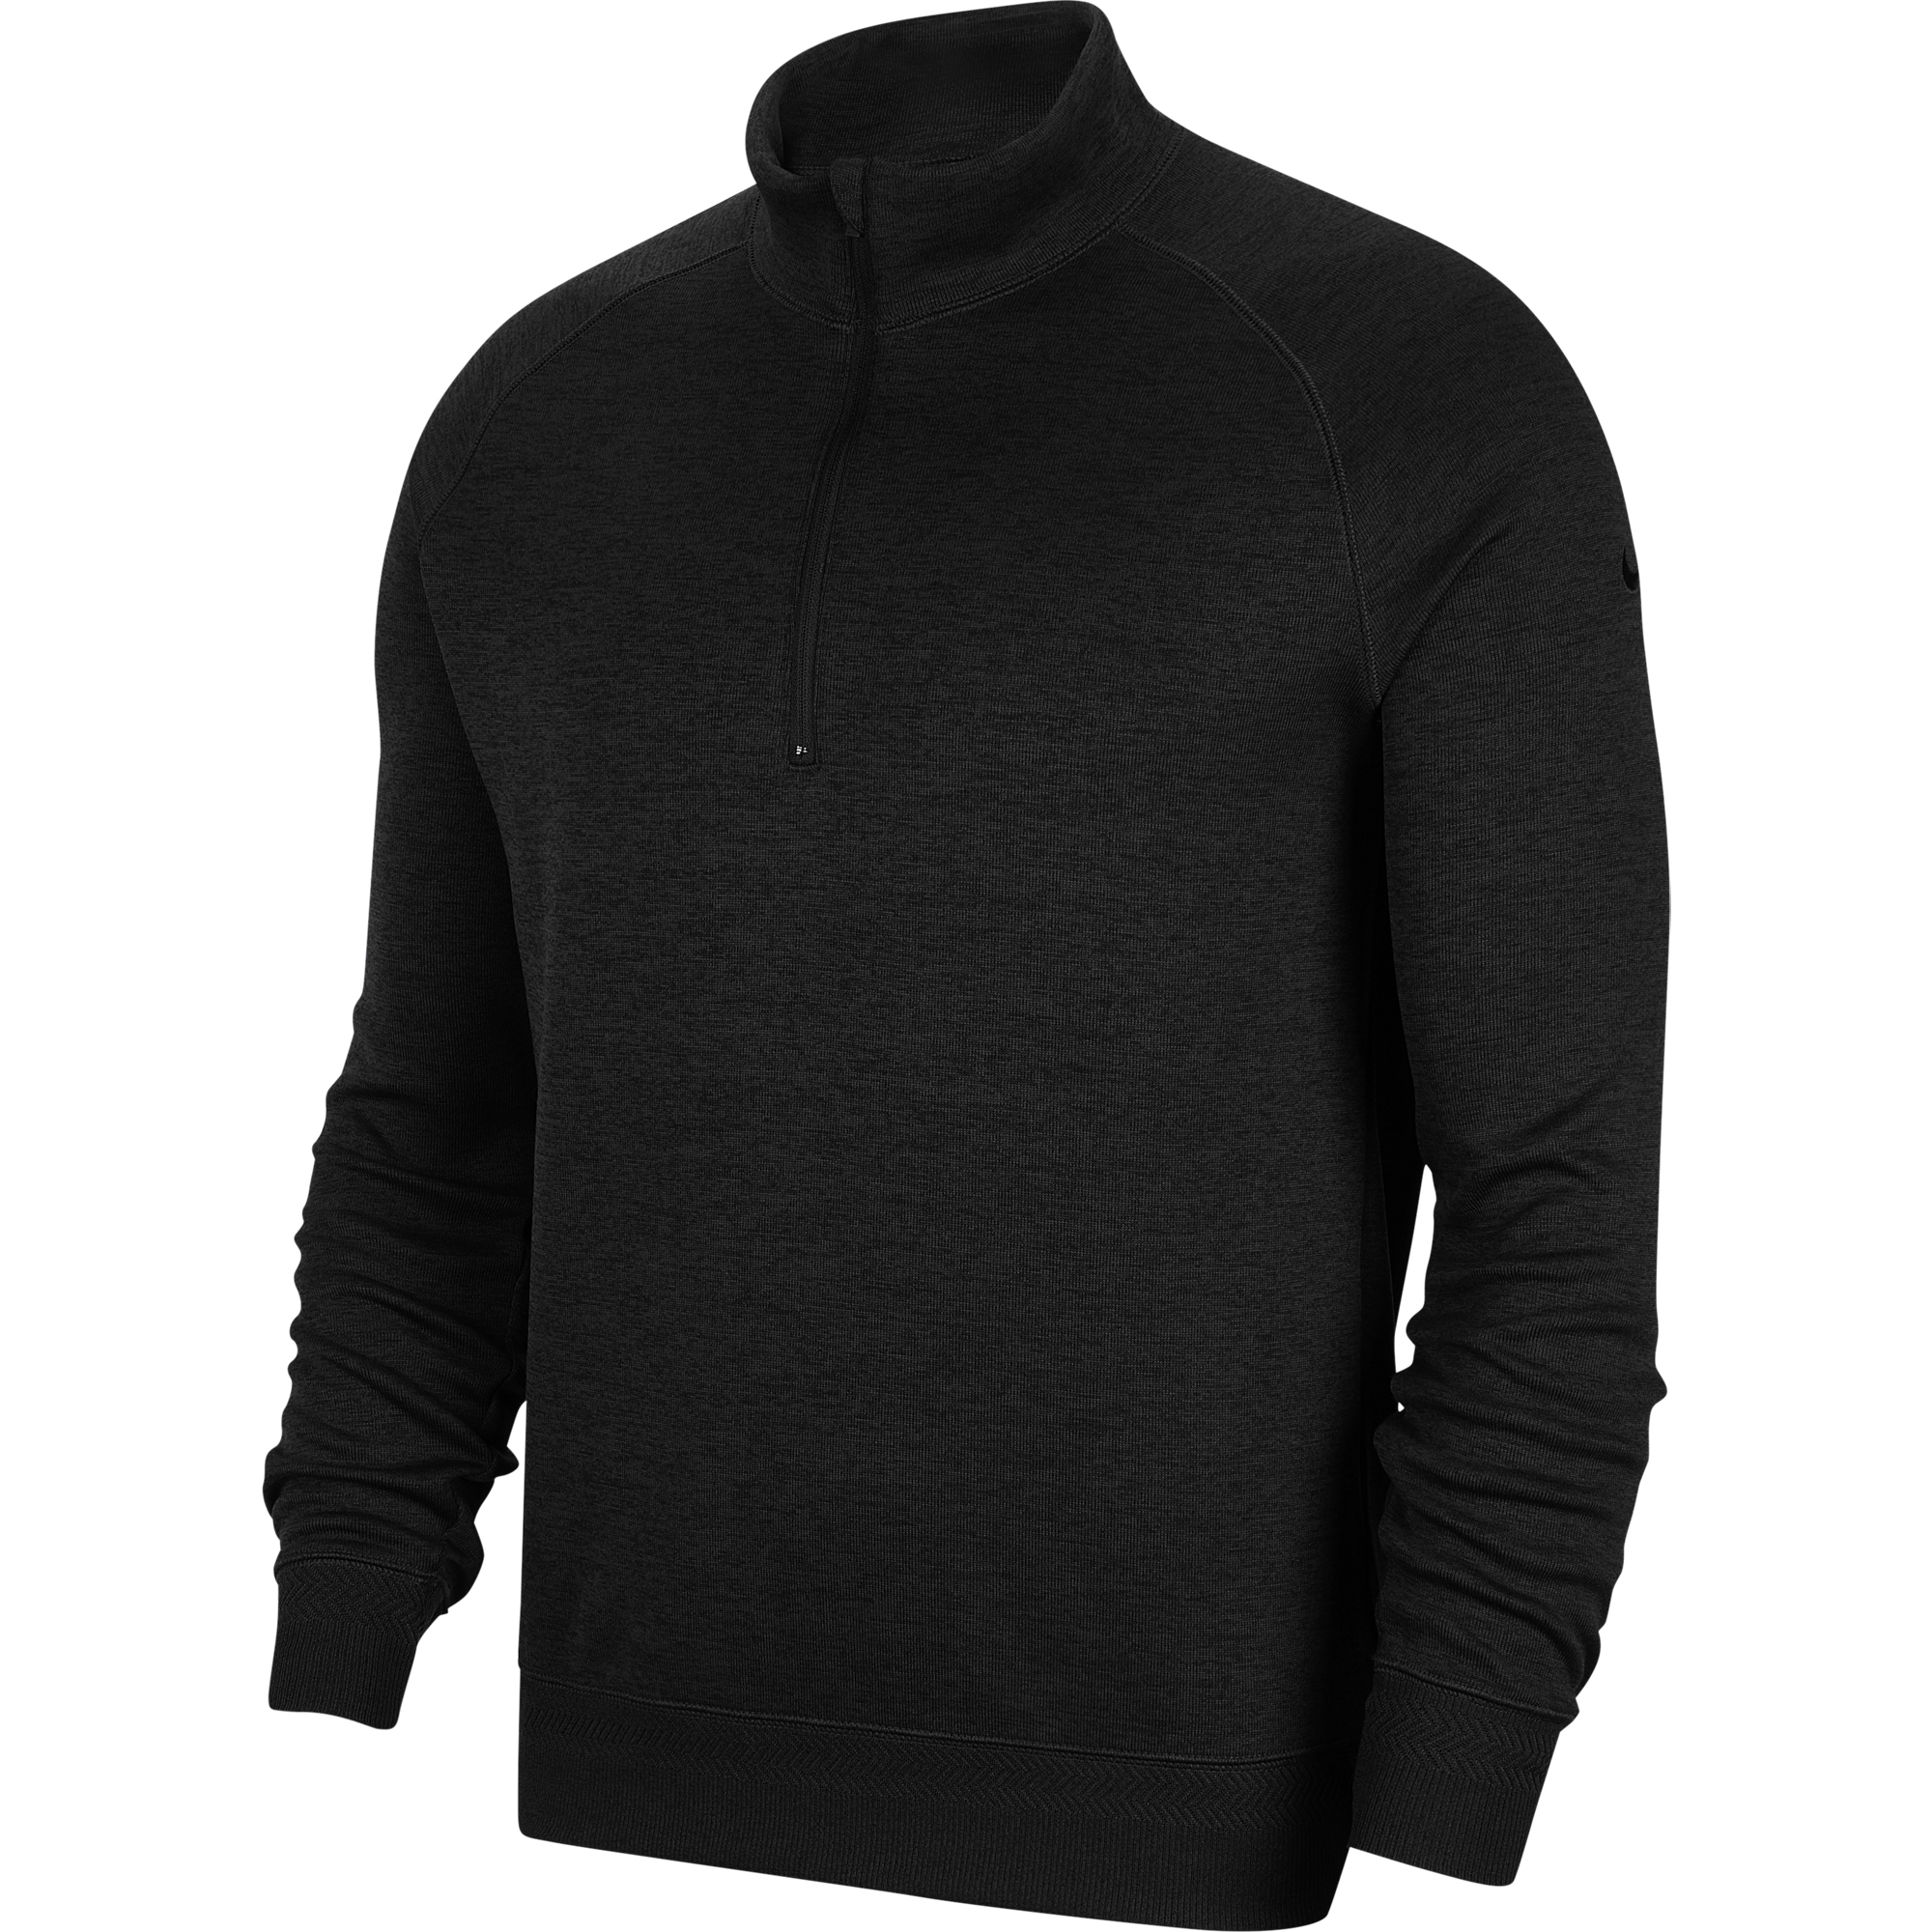 Nike Mens Dry Fit Players Half Zip Wicking Golf Sweater L- Chest 41-44